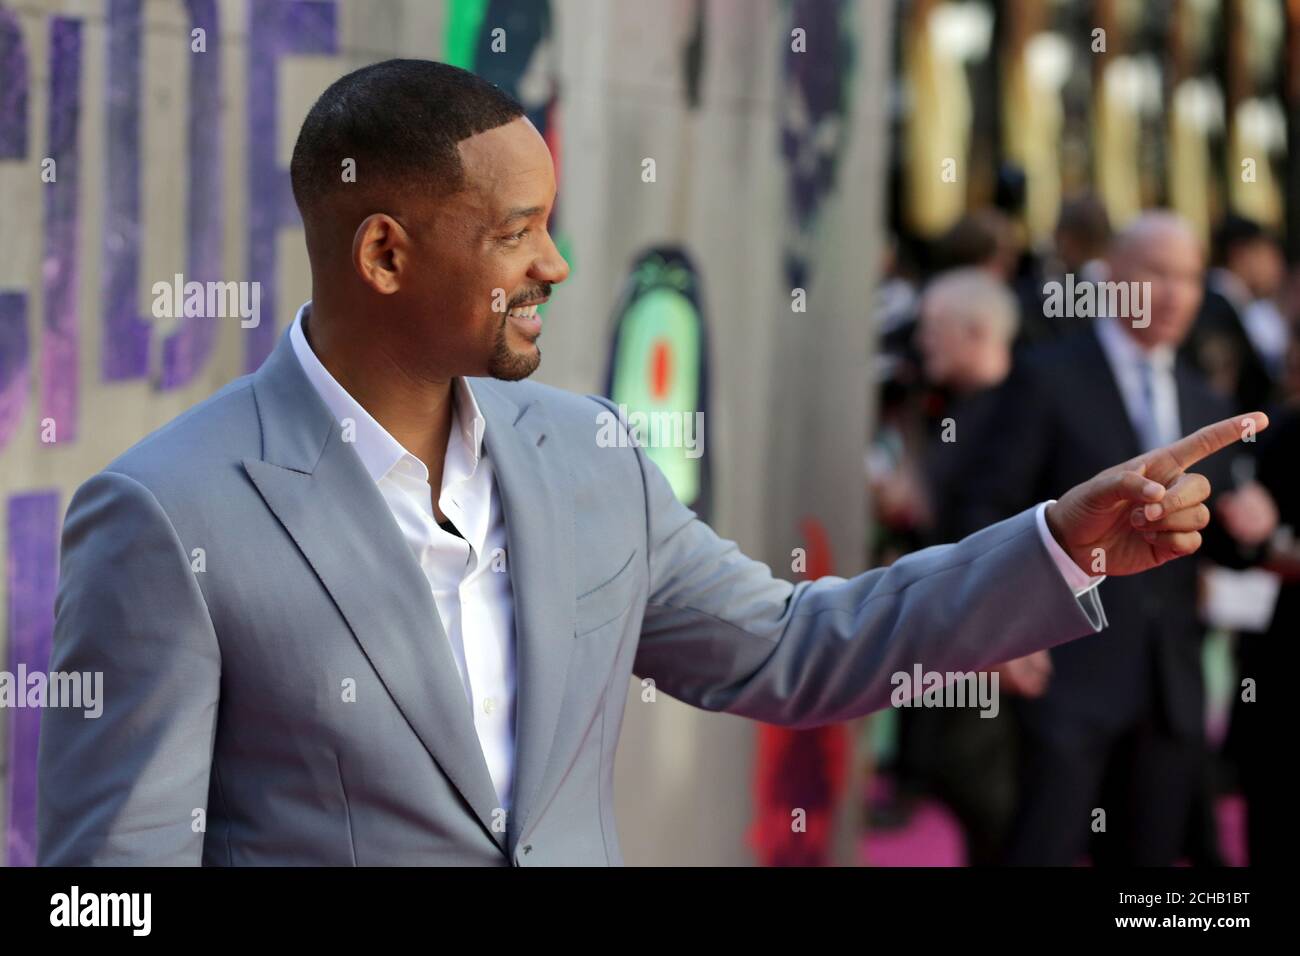 Will Smith kommt zur Europa-Premiere der Suicide Squad am Odeon Leicester Square in London an. Stockfoto